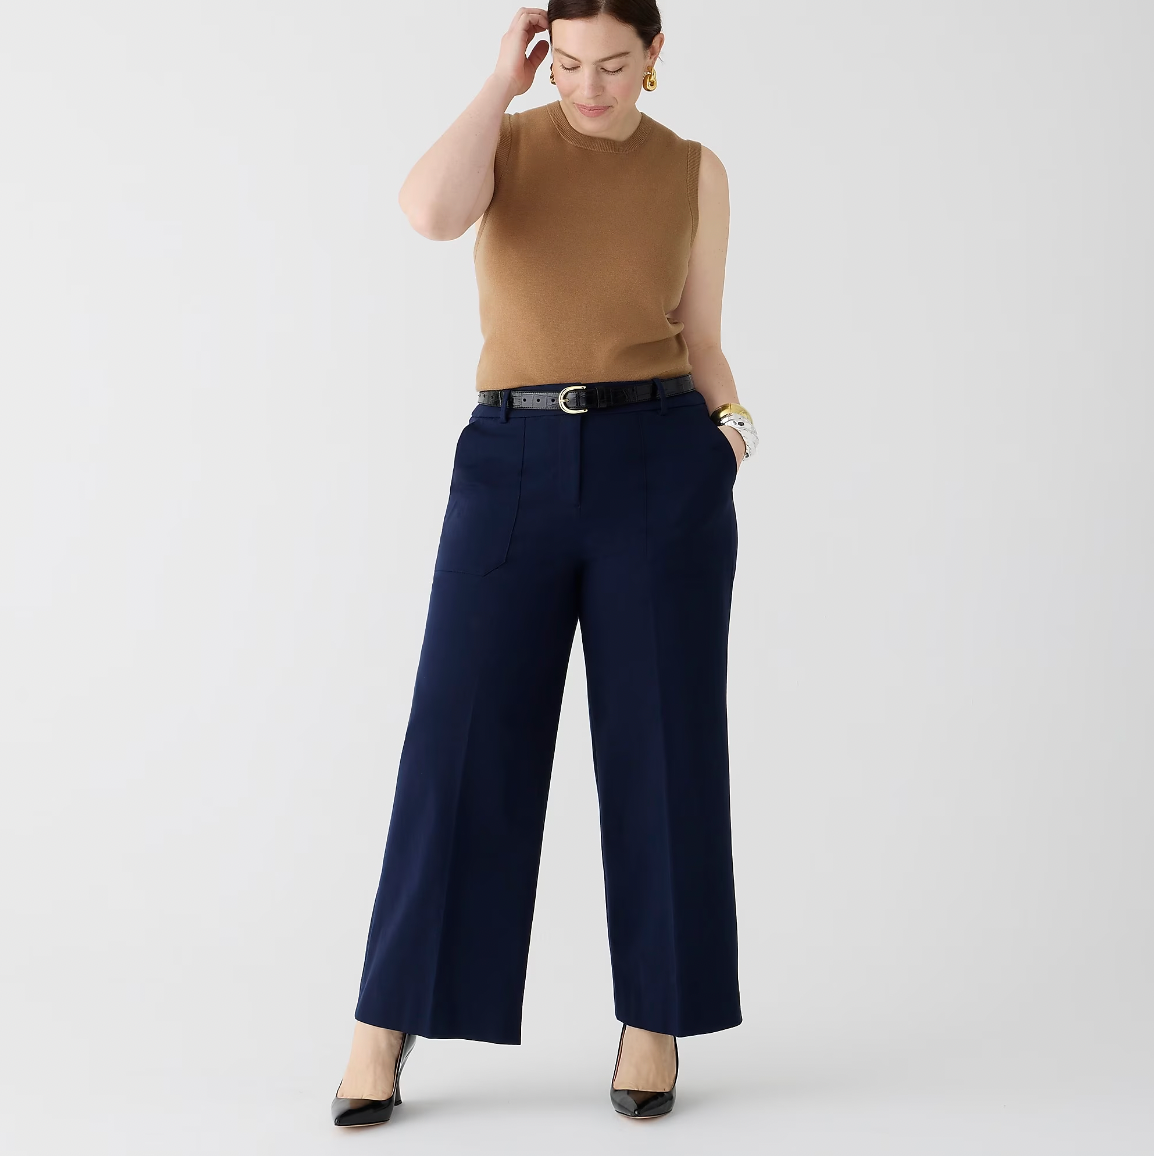 Work Pants for Women: Top Picks for All Types of Jobs